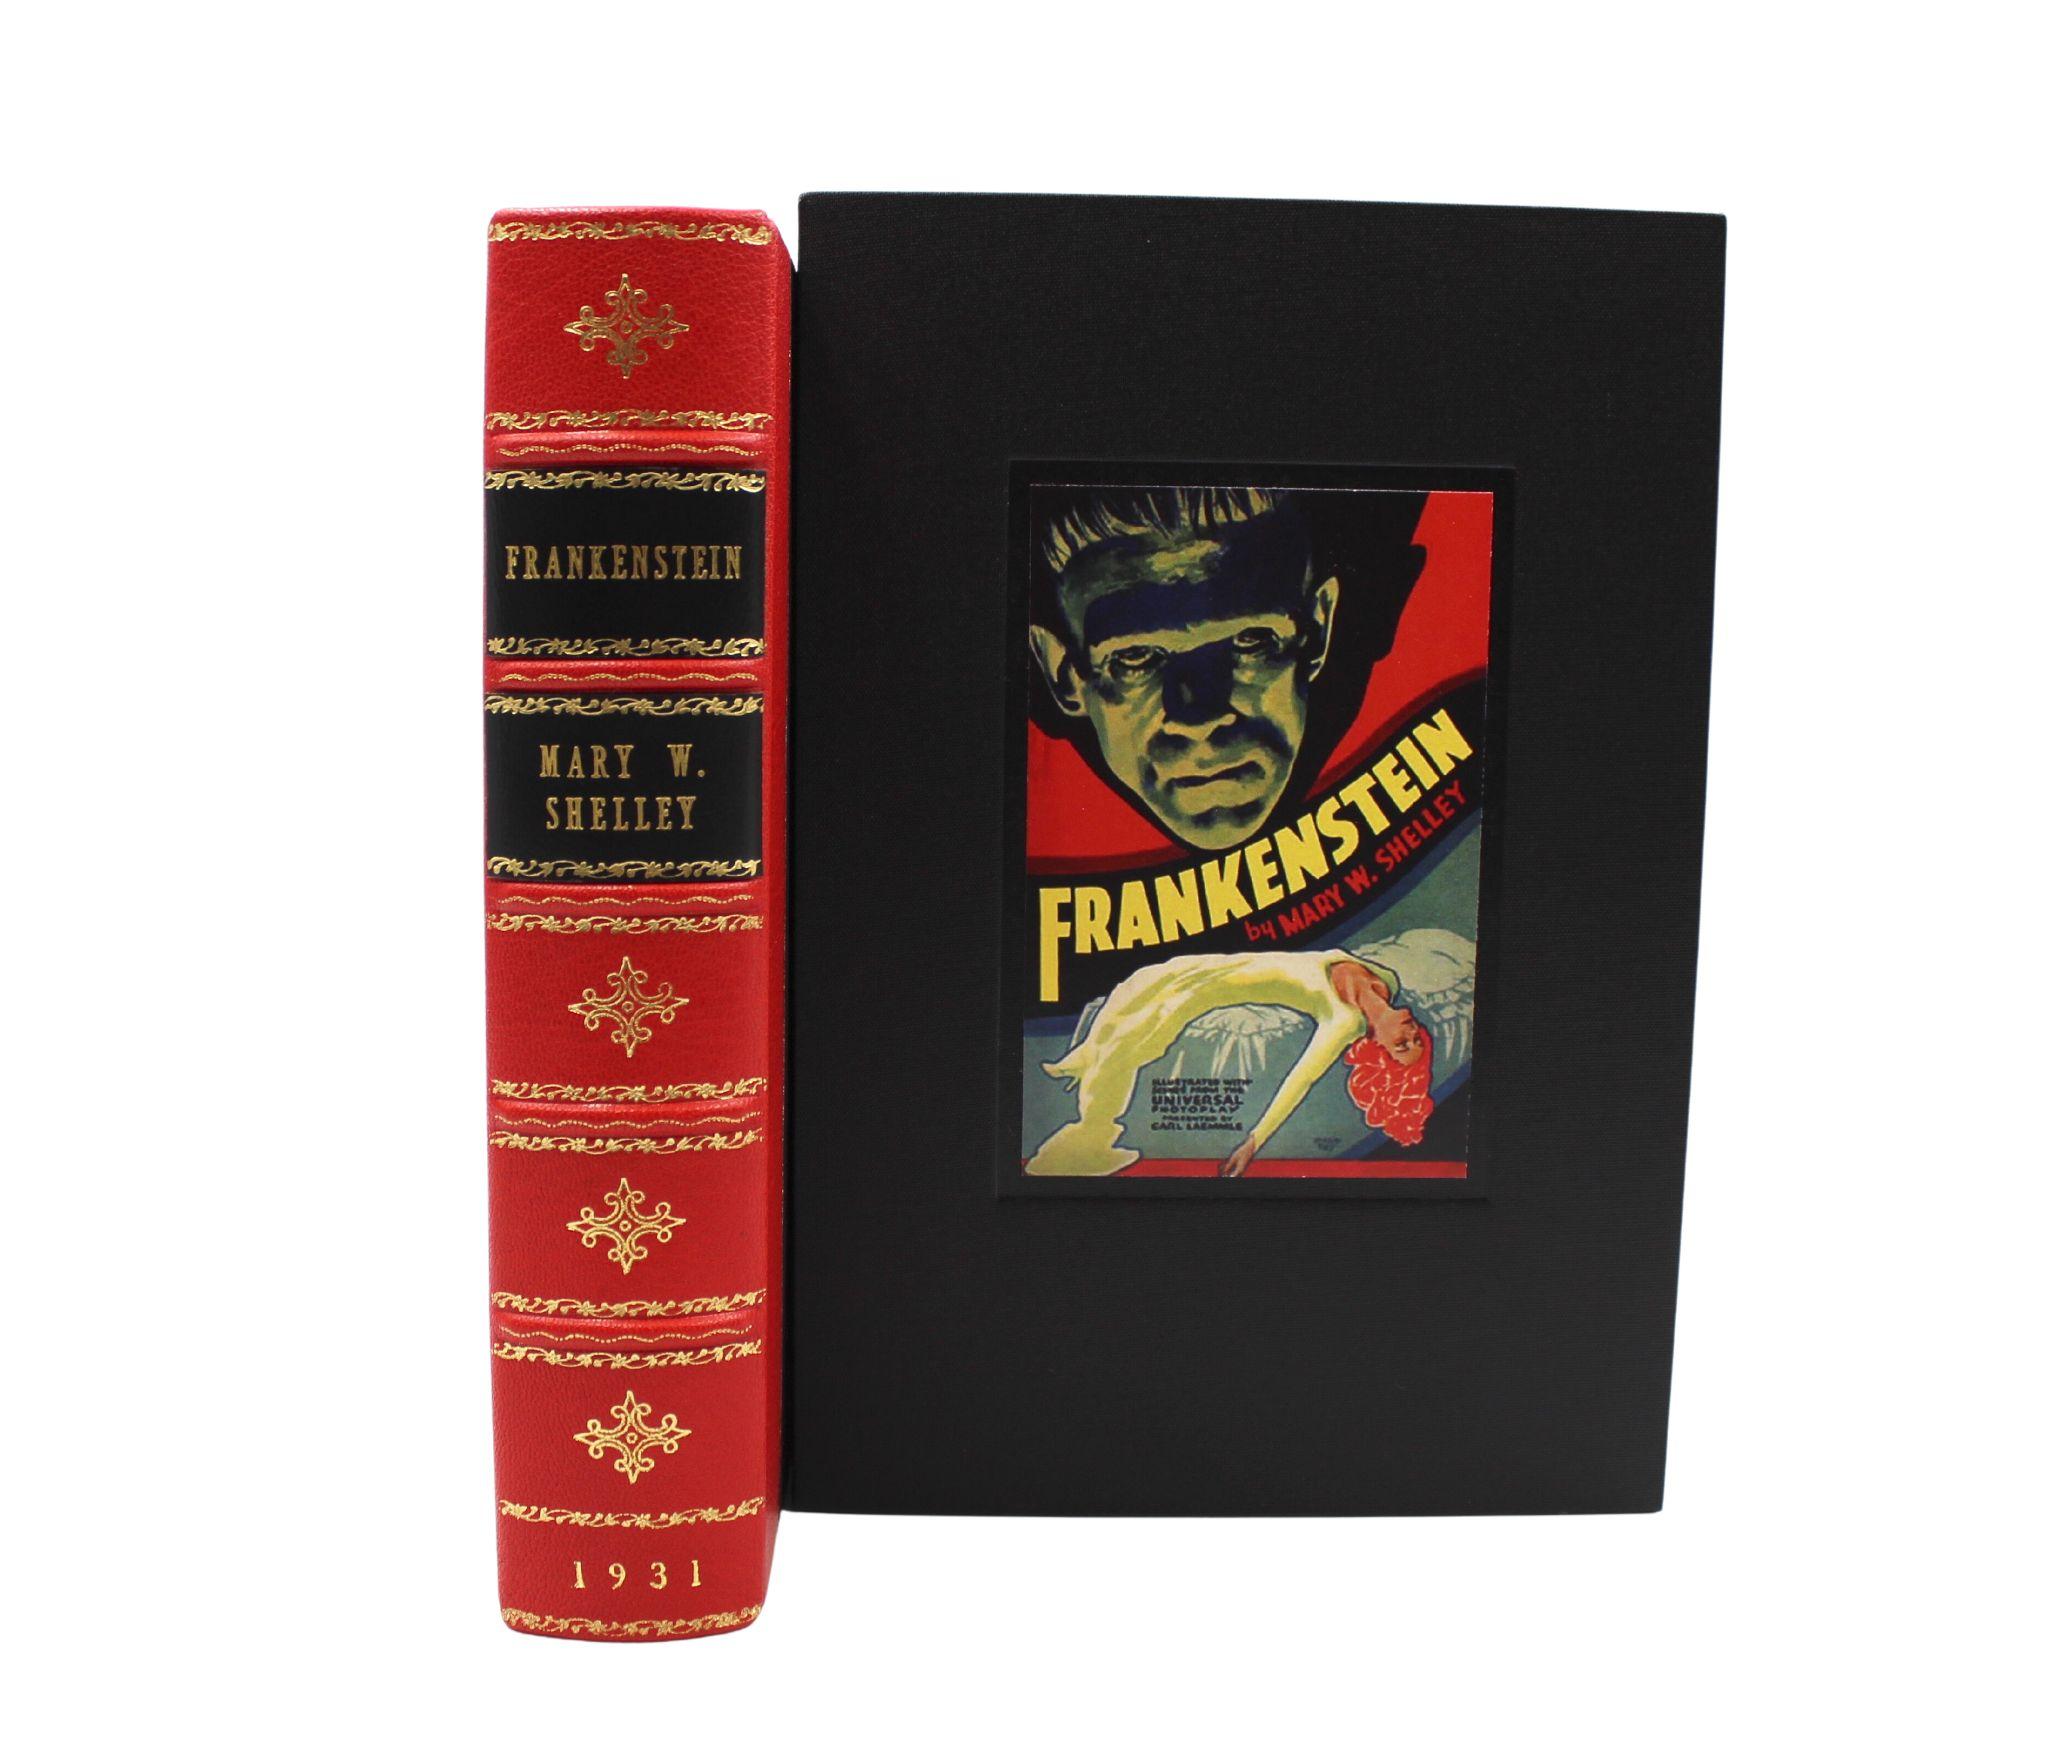 American Frankenstein by Mary W. Shelley, Photoplay Grosset & Dunlap Edition, 1931 For Sale